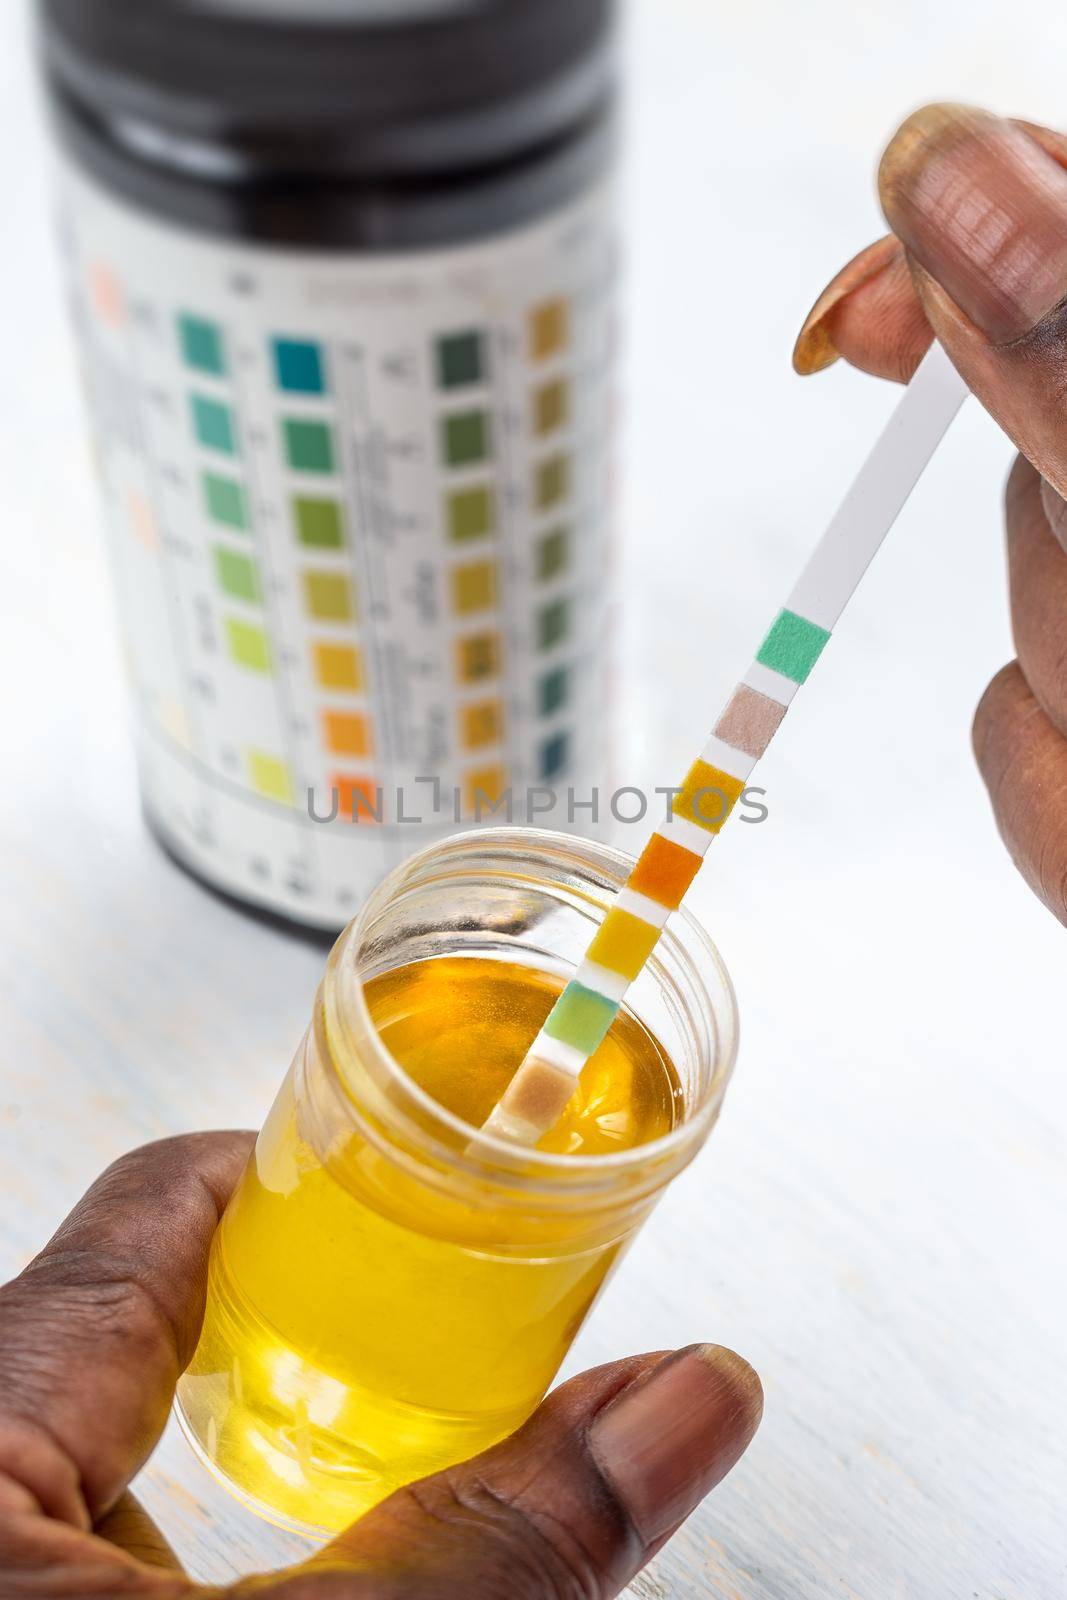 Urine Self-Tests-Self-Measurement close up view by JPC-PROD